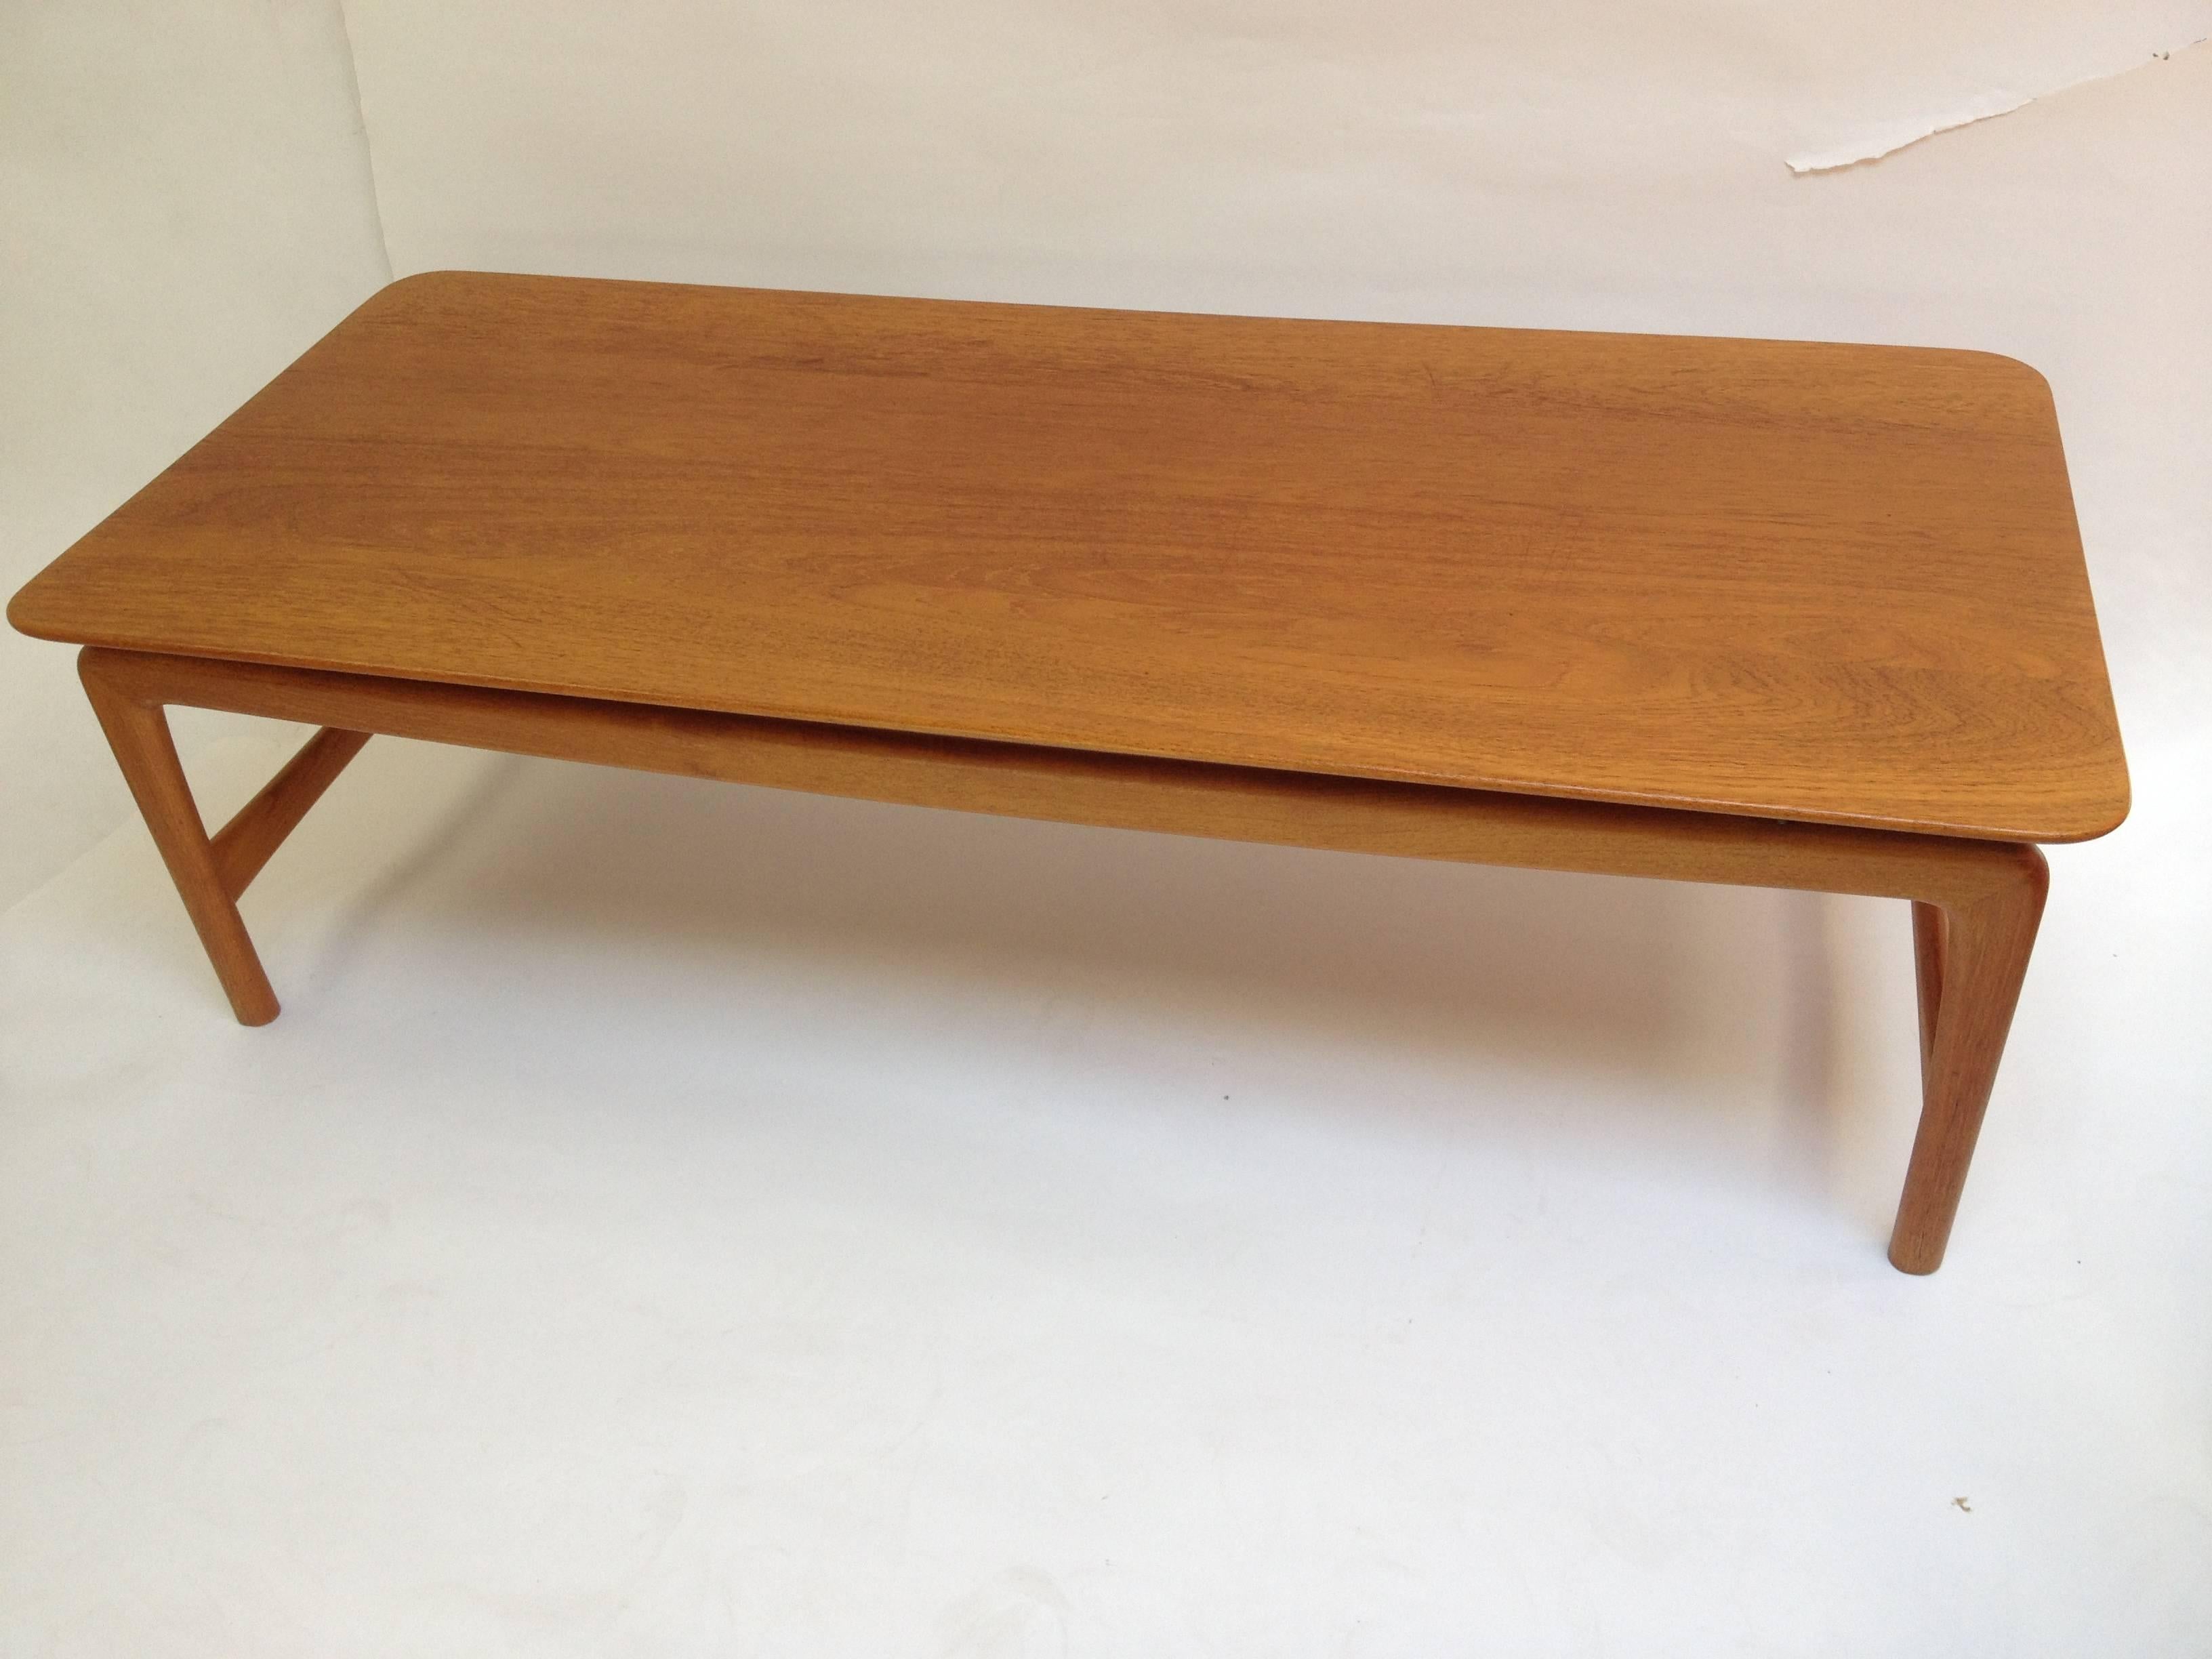 Gorgeous 1950s solid teak coffee table designed by Peter Hvidt for France & Daverkosen. Made in Denmark, this beauty is sleek and classic with lovely brass ball accents. The condition is very good with the original lovely patina, however from use